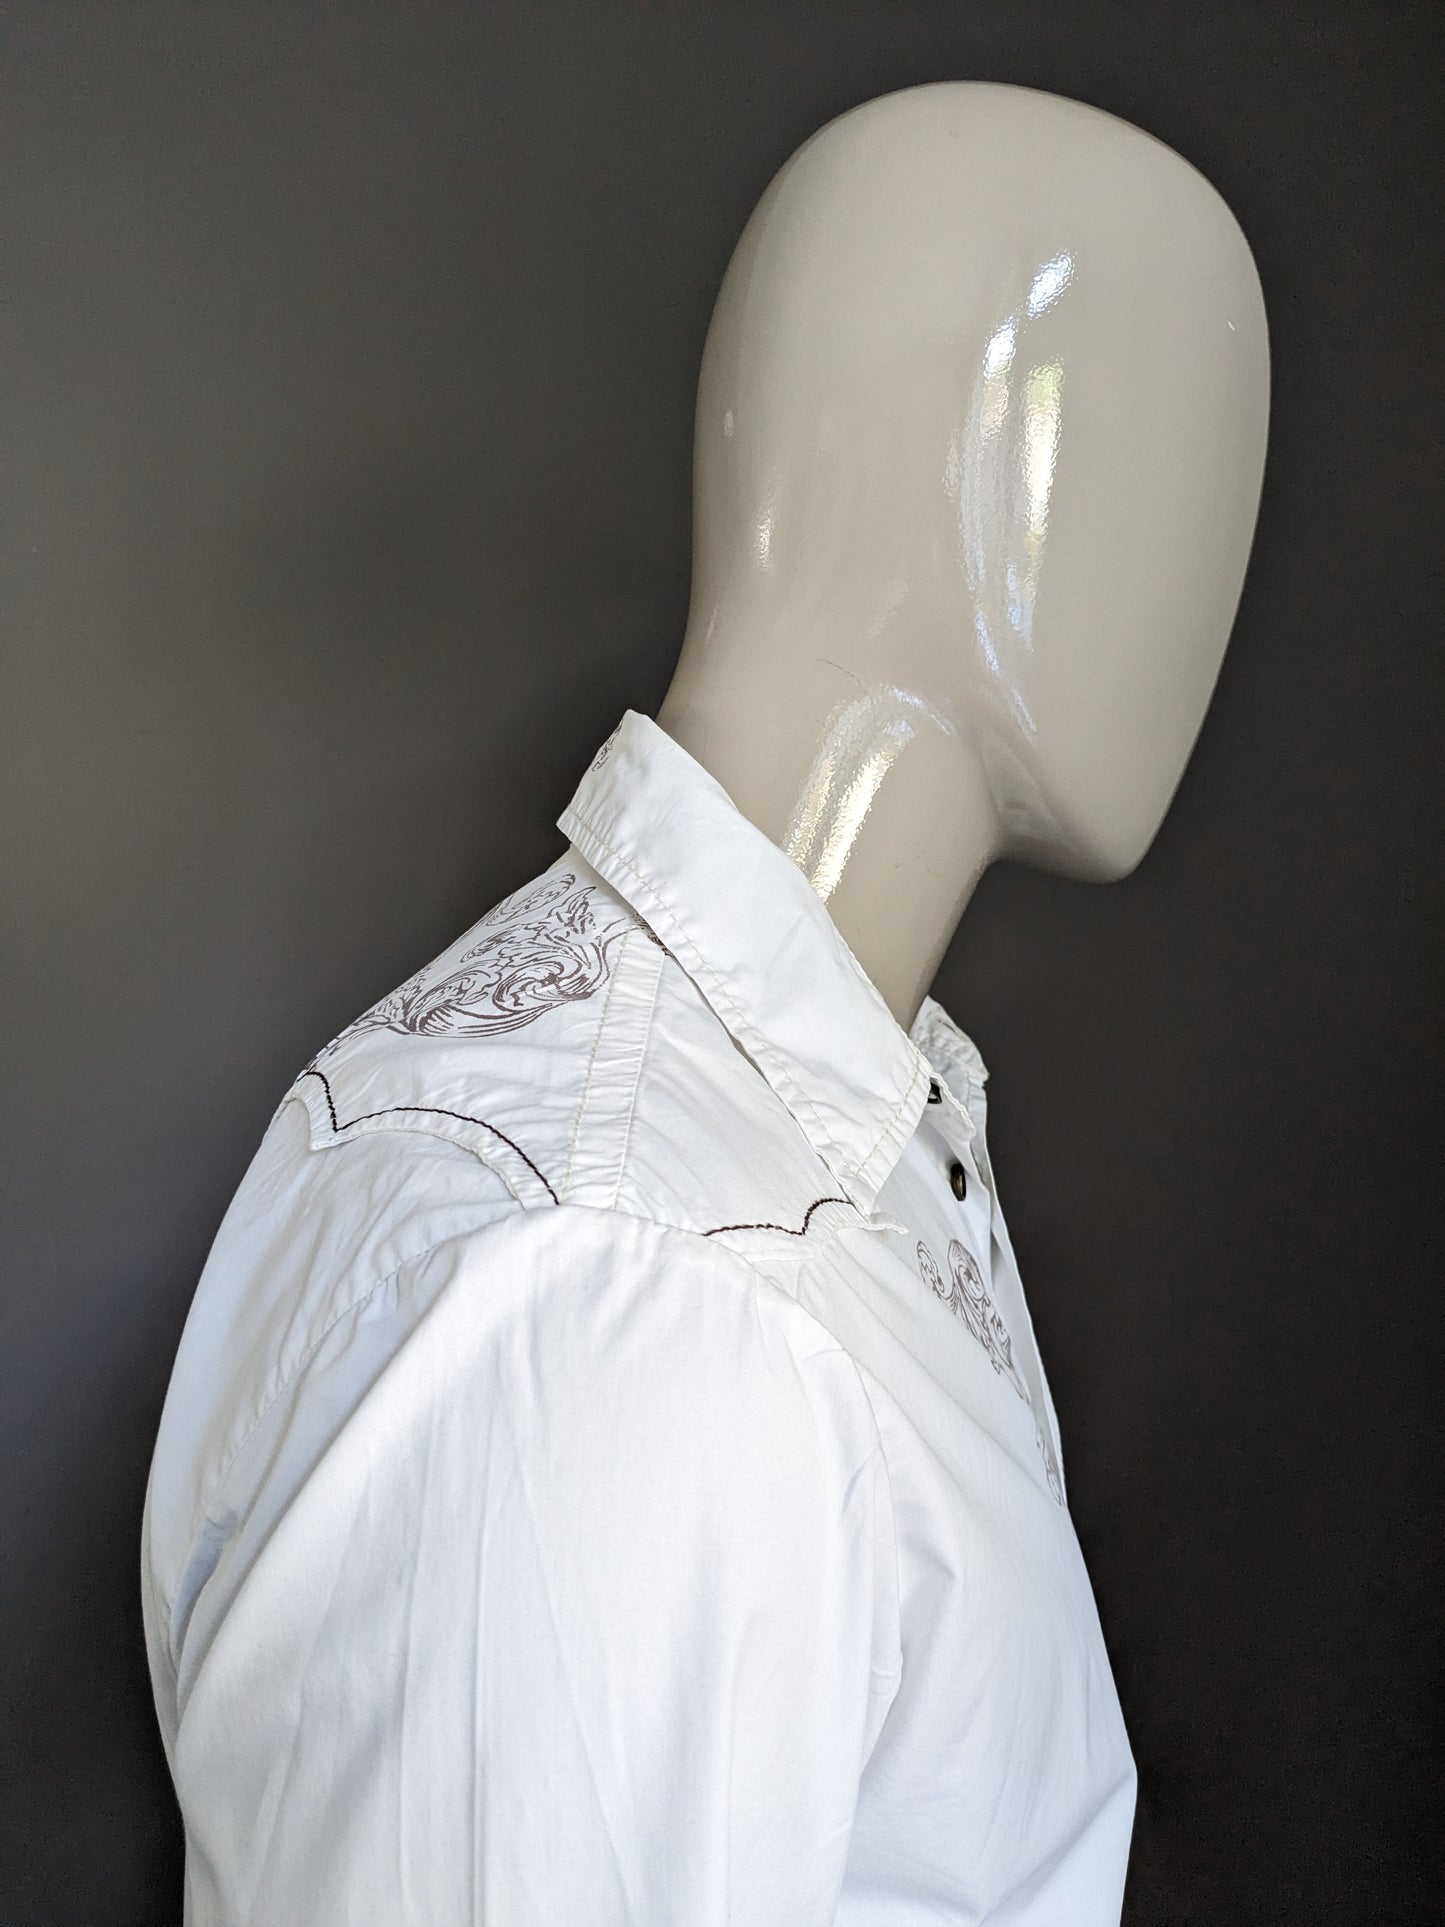 Vintage unique energy western shirt. White brown colored and lightly tailored. Size L.